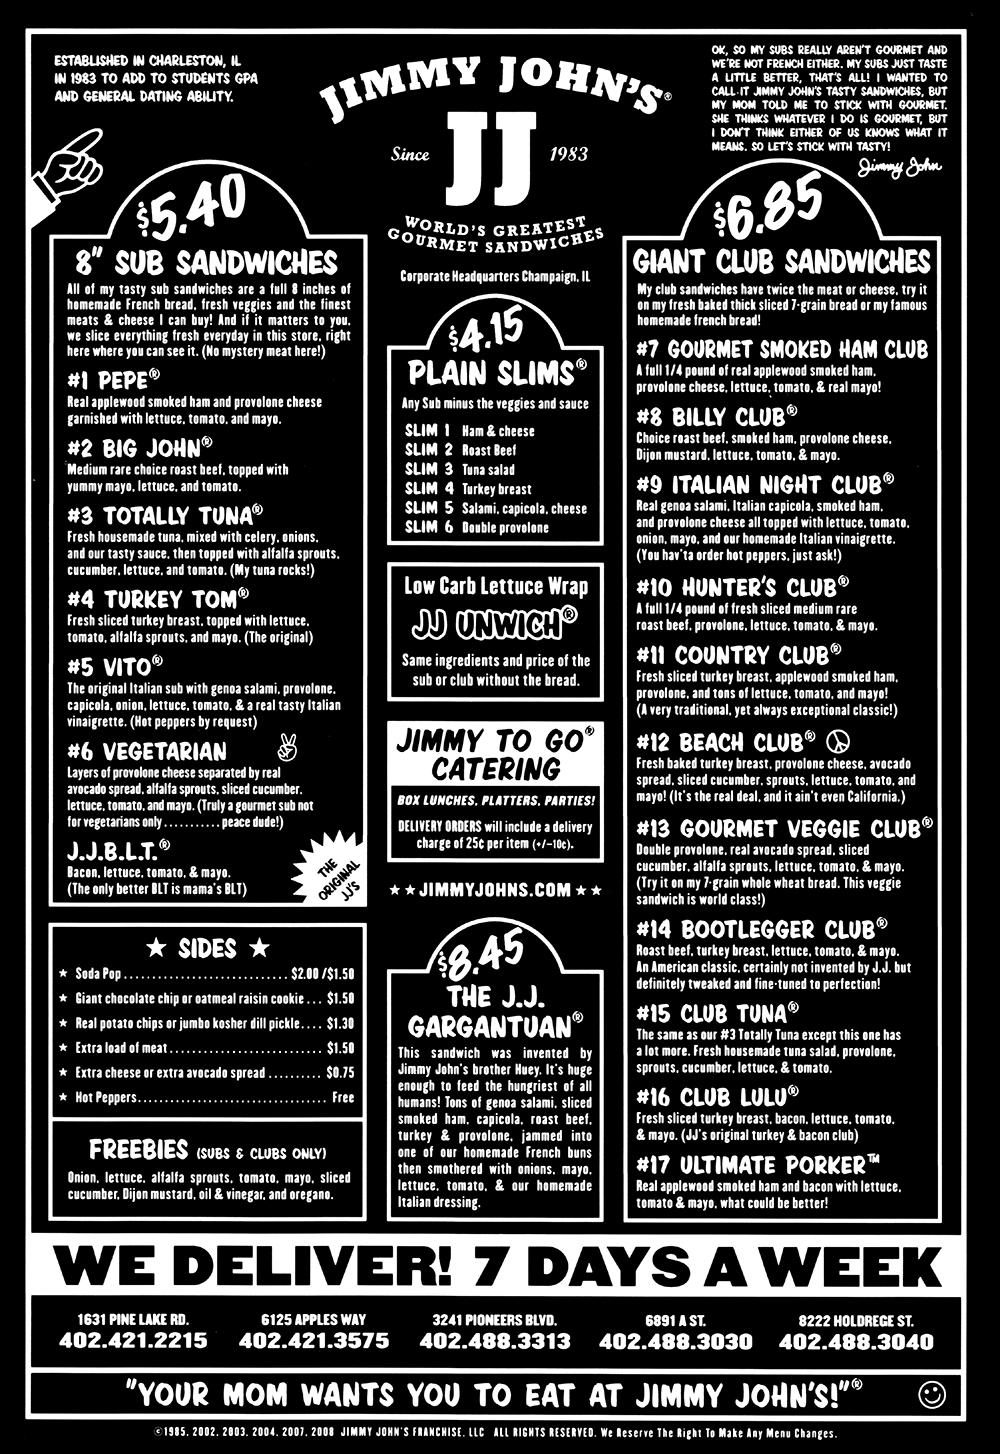 Jimmy John #39 s Delivery Menu With Prices Lincoln NE Provided by